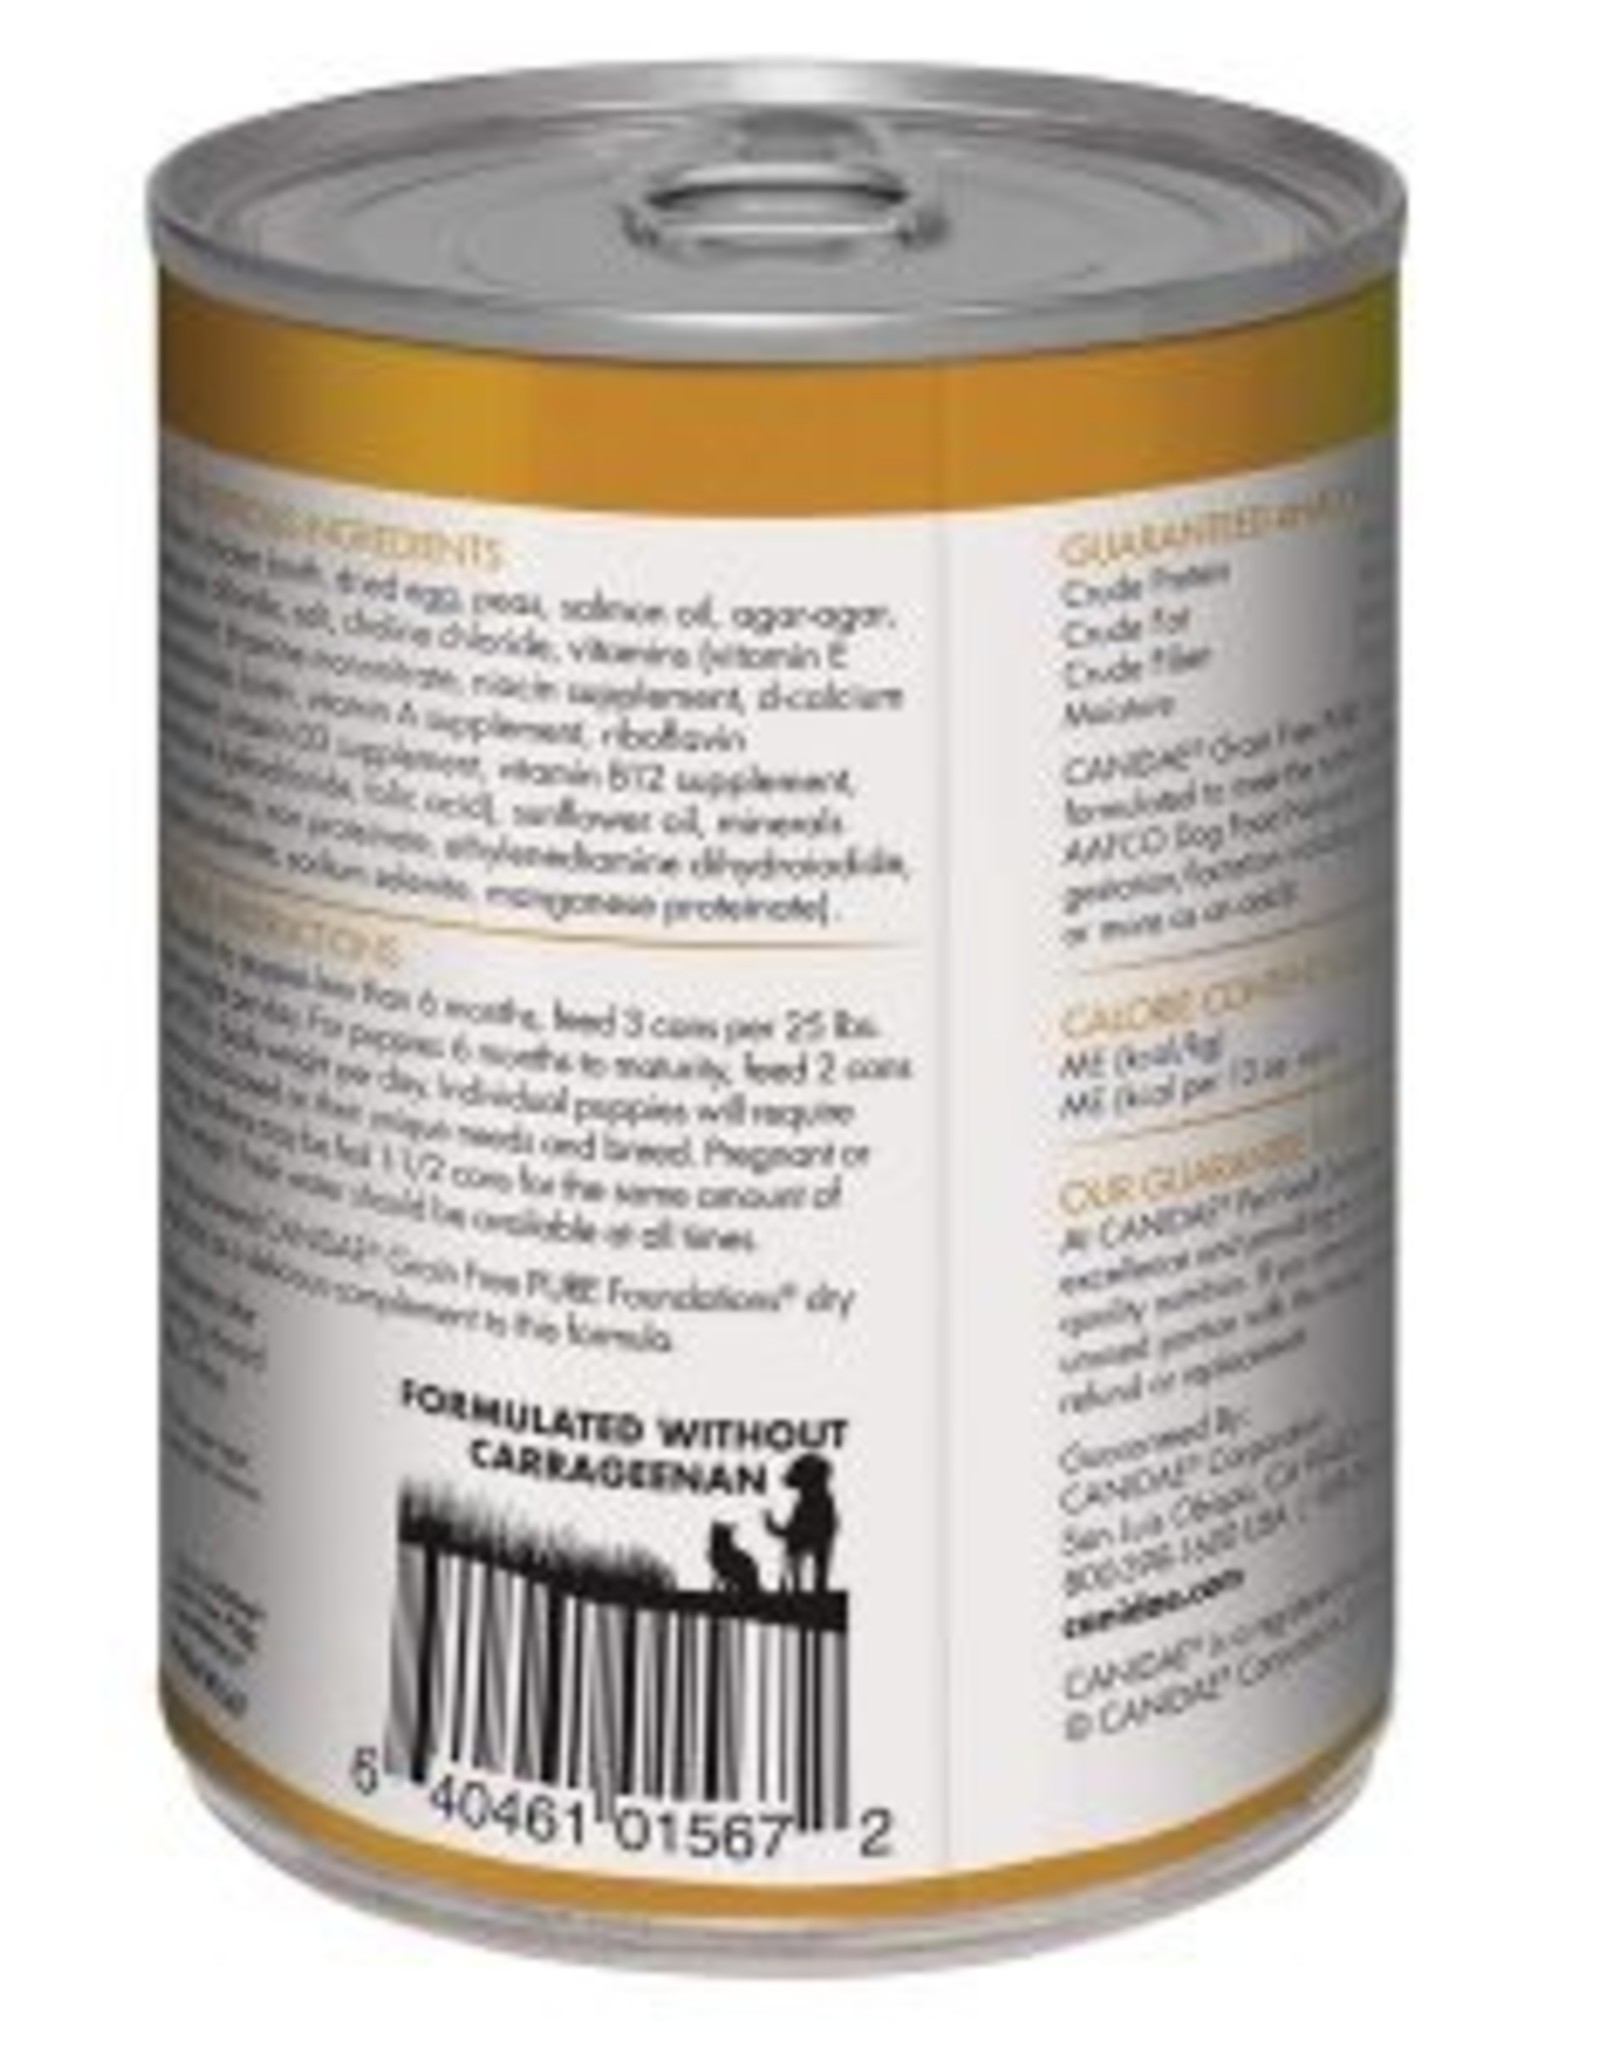 CANIDAE PET FOODS CANIDAE PUPPY CAN CHICKEN RECIPE 13OZ CASE OF 12